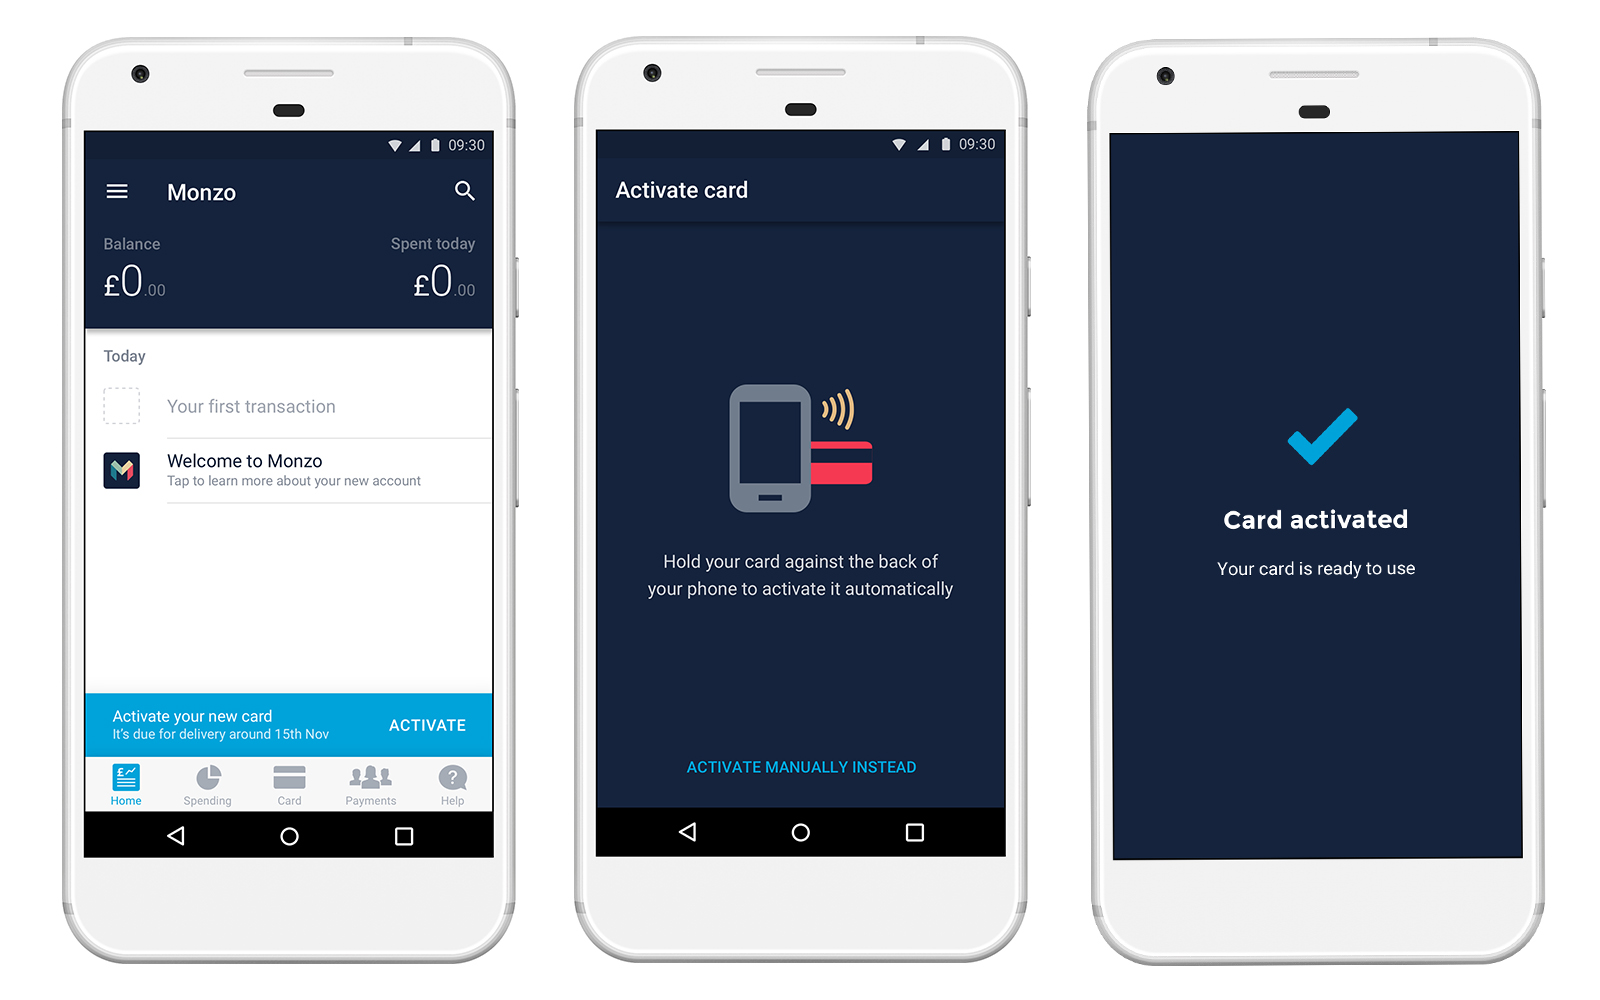 Screenshots of the NFC-powered one-tap card activation flow